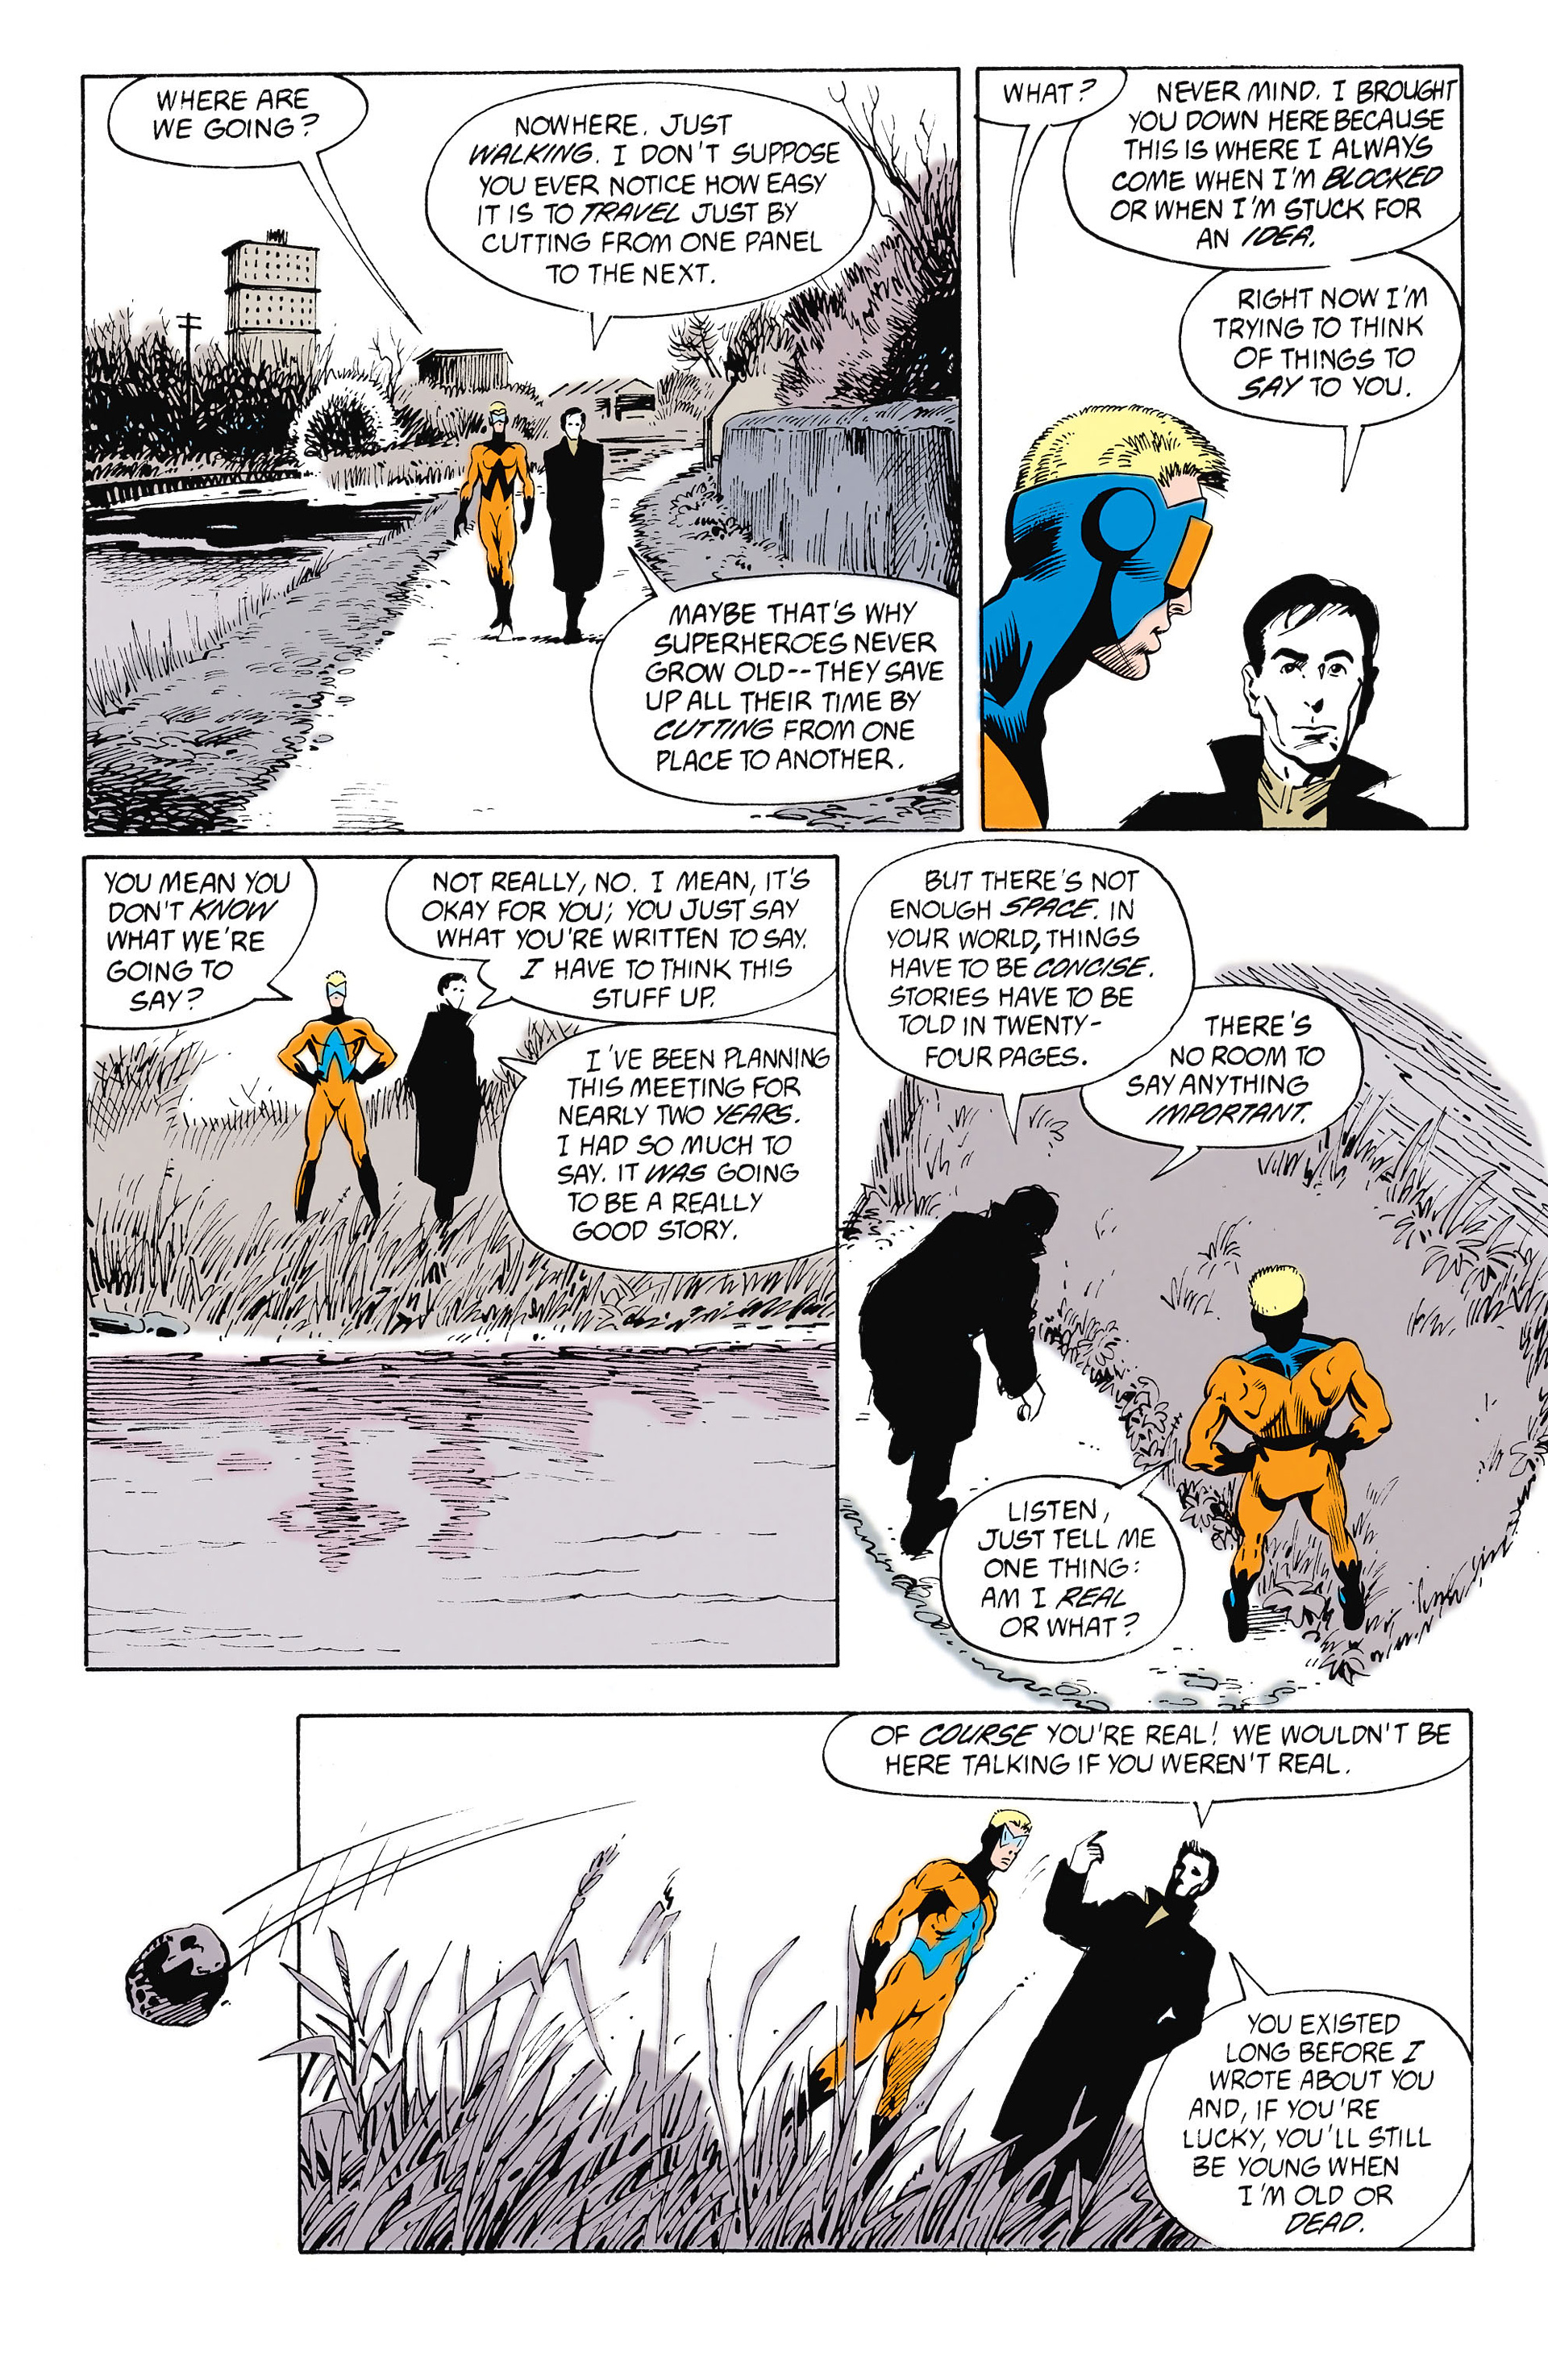 Animal Man Issue 26 | Read Animal Man Issue 26 comic online in high  quality. Read Full Comic online for free - Read comics online in high  quality .| READ COMIC ONLINE